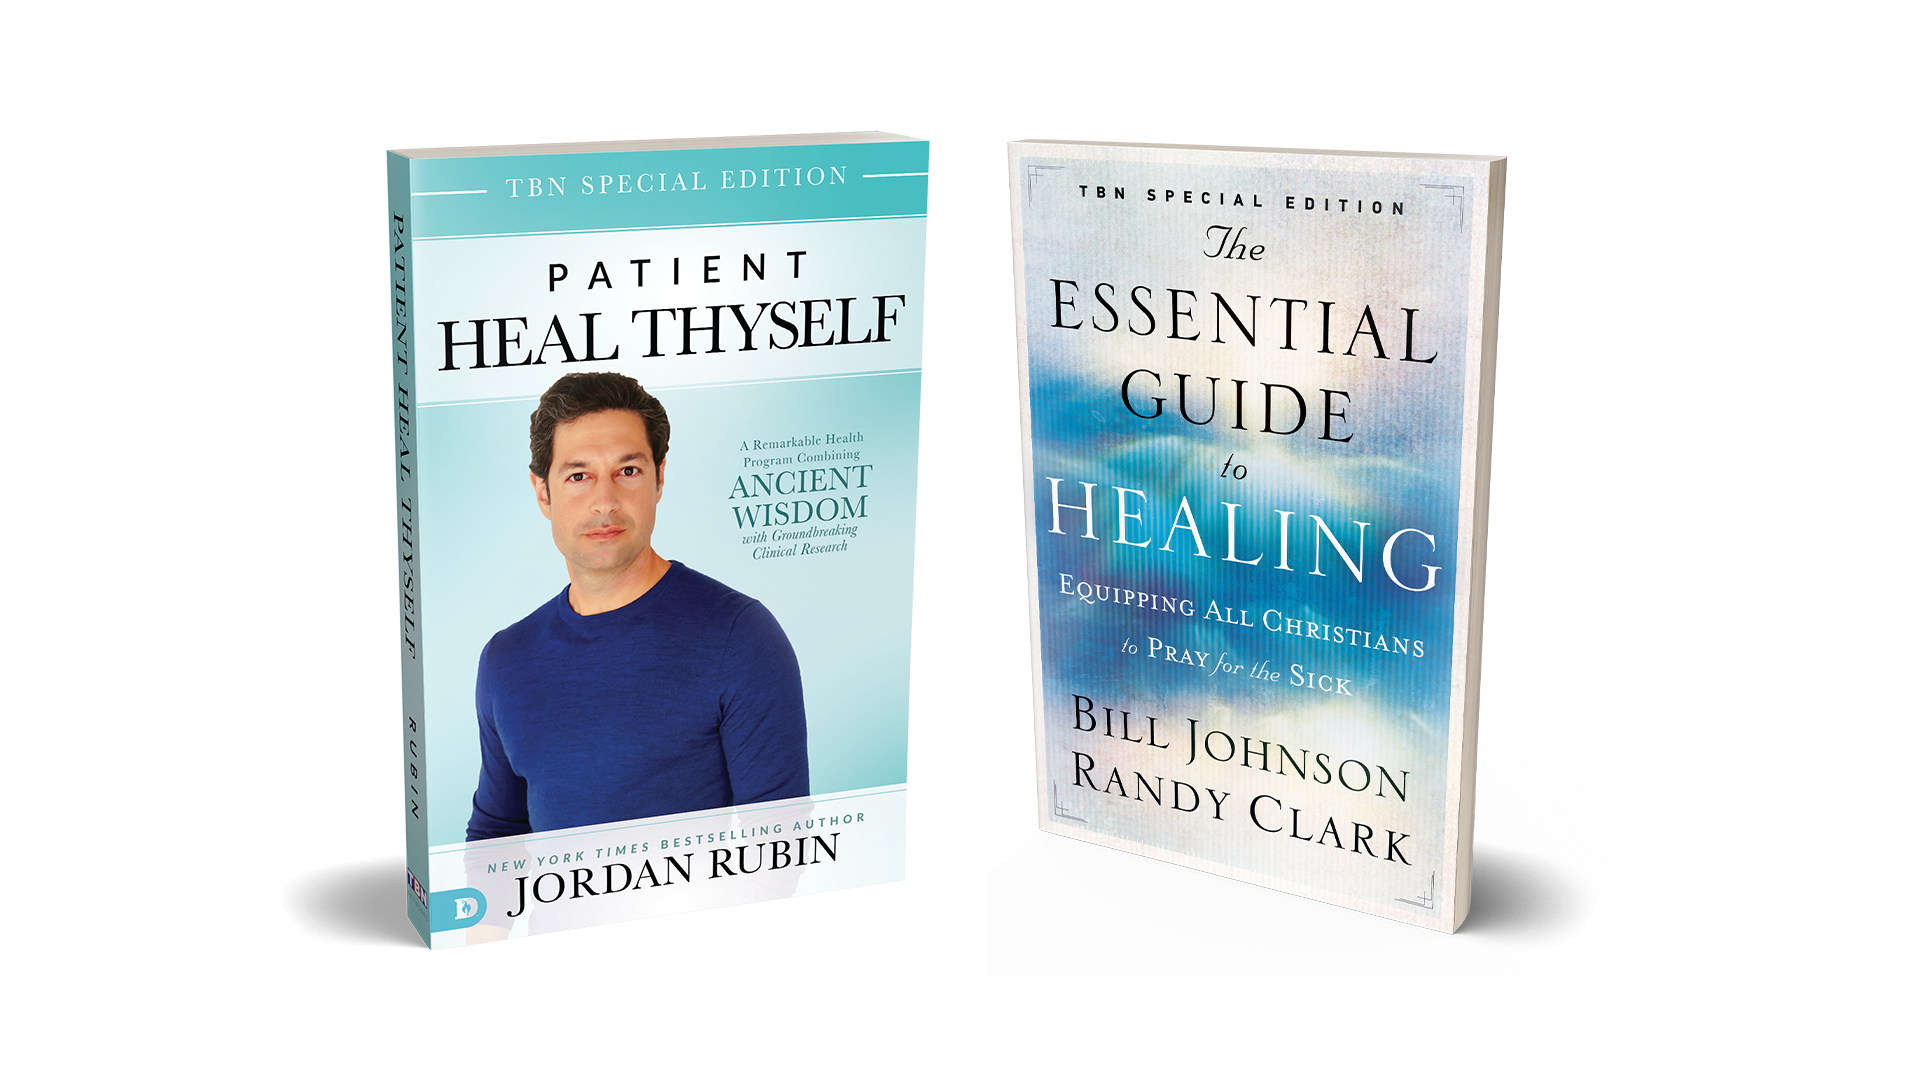 Patient Heal Thyself & The Essential Guide to Healing by TBN on TBN